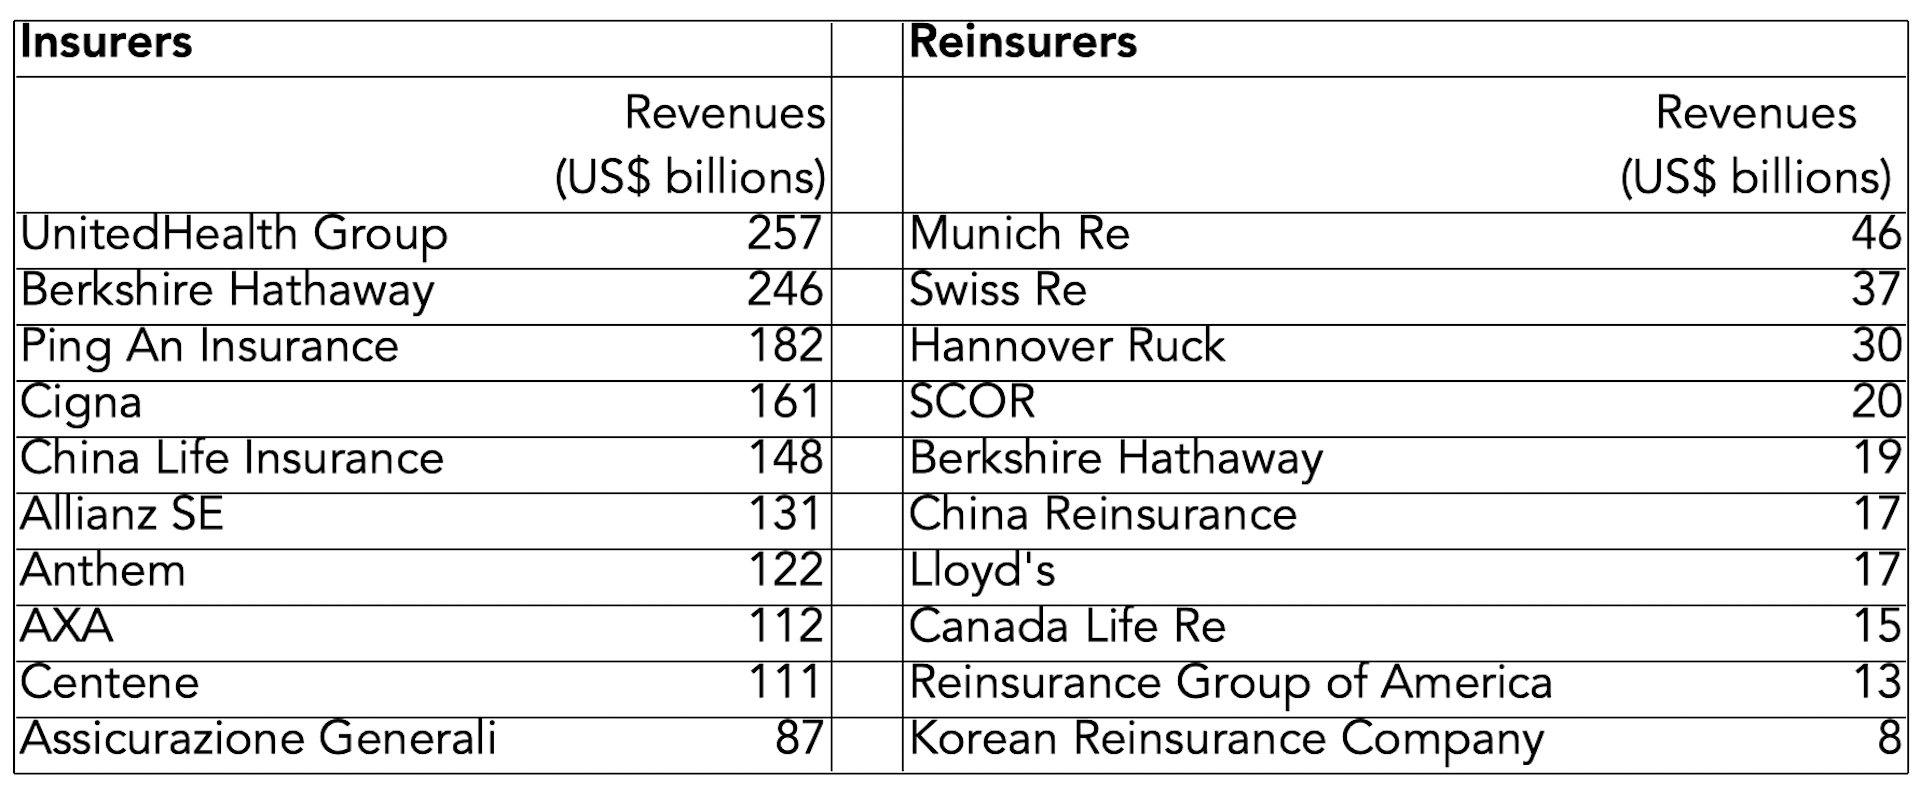 Table showing largest insurers and reinsurers by revenues